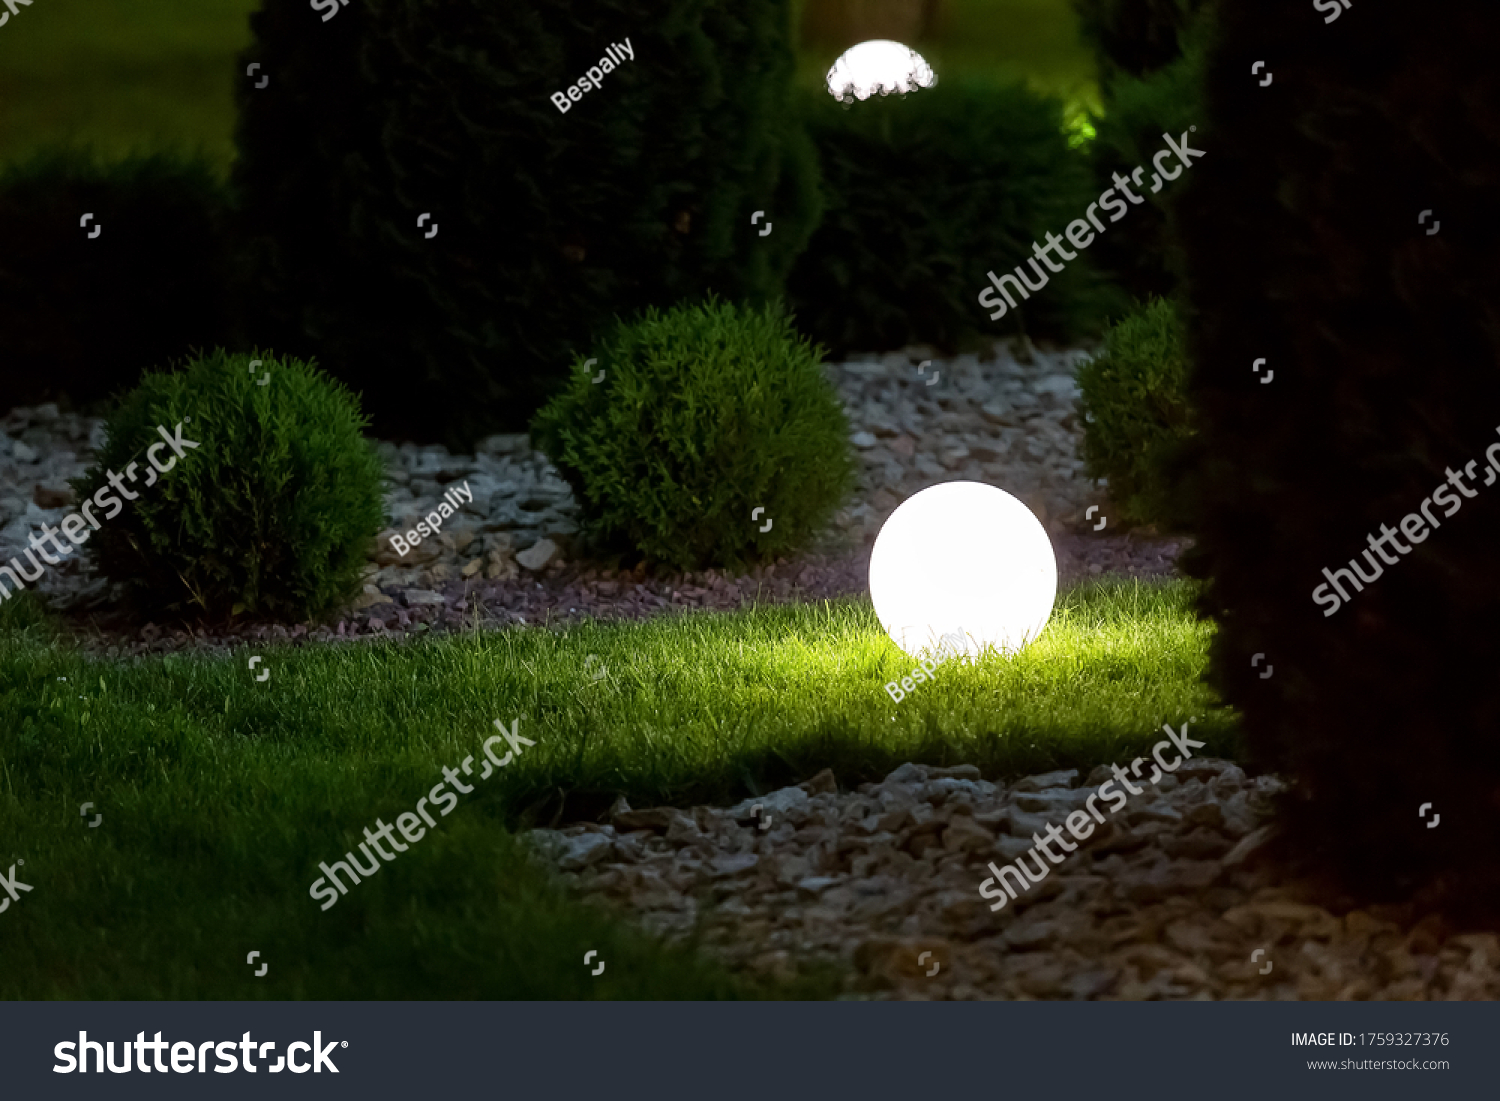 illumination backyard light garden with electric ground lantern with round diffuser lamp in lawn in outdoor park with landscaping thuja bushes in stone mulching, dark illuminate night scene nobody. #1759327376